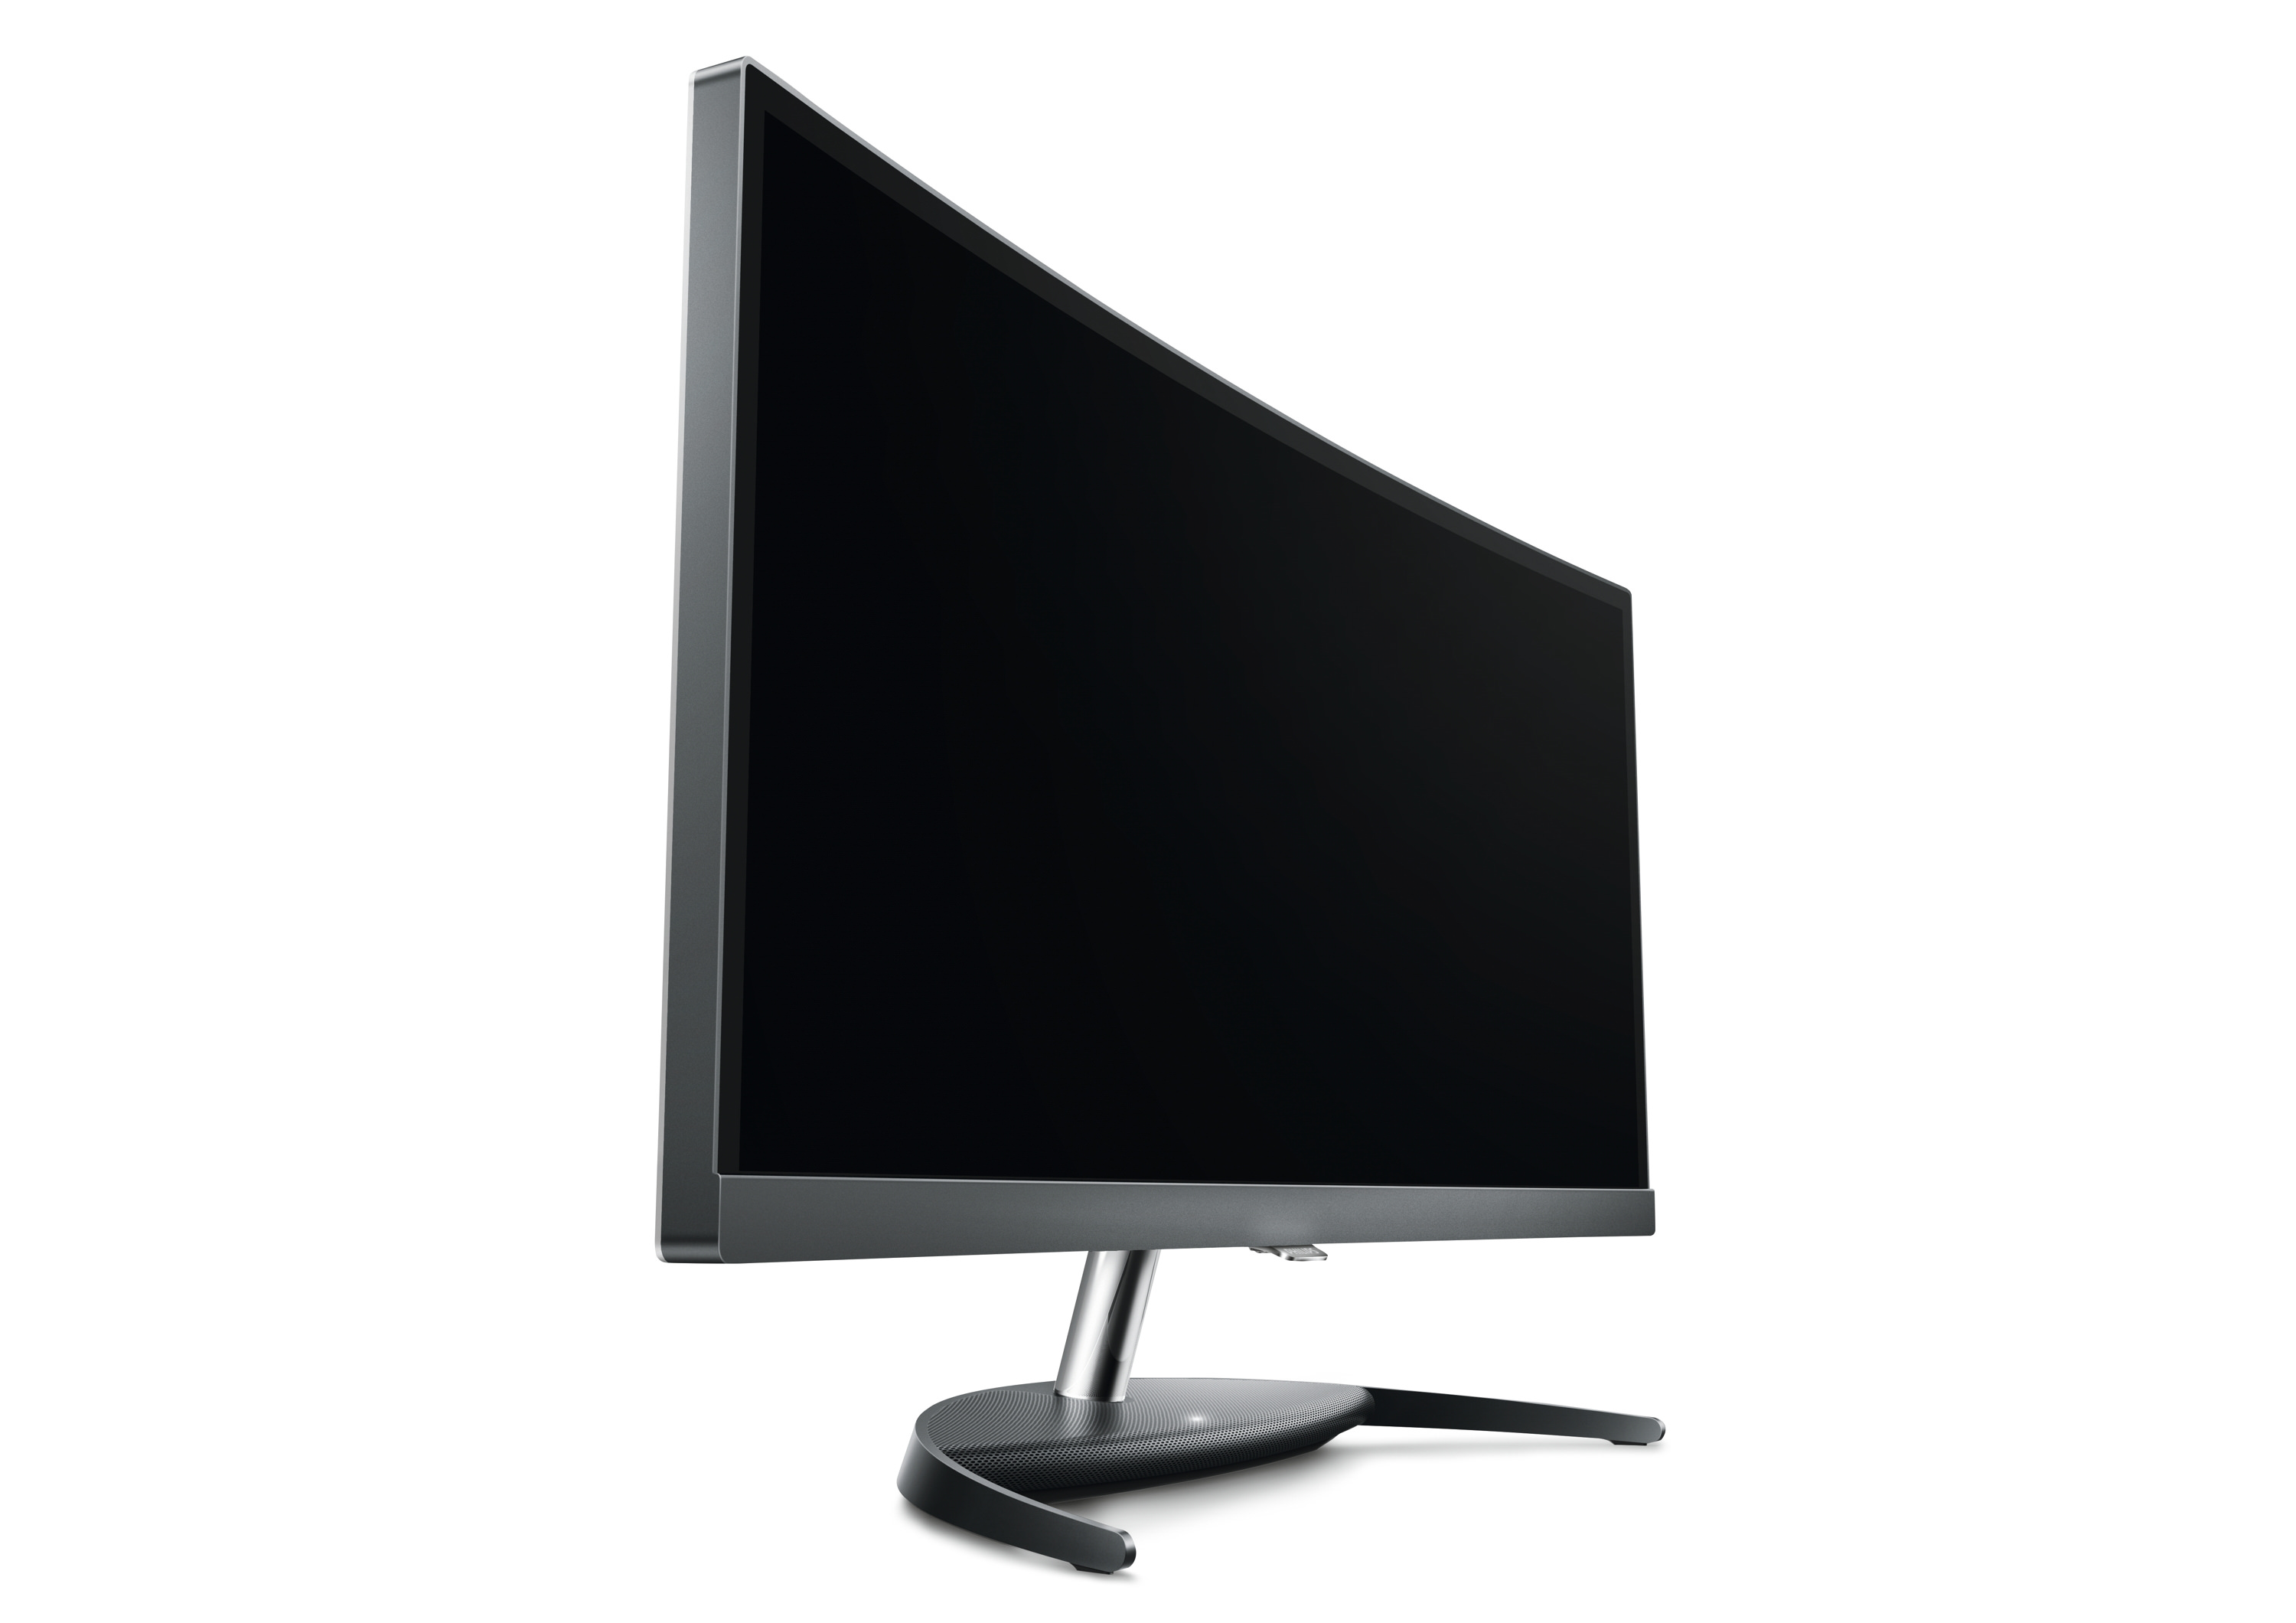 Philips Brilliance Curved UltraWide LCD Display